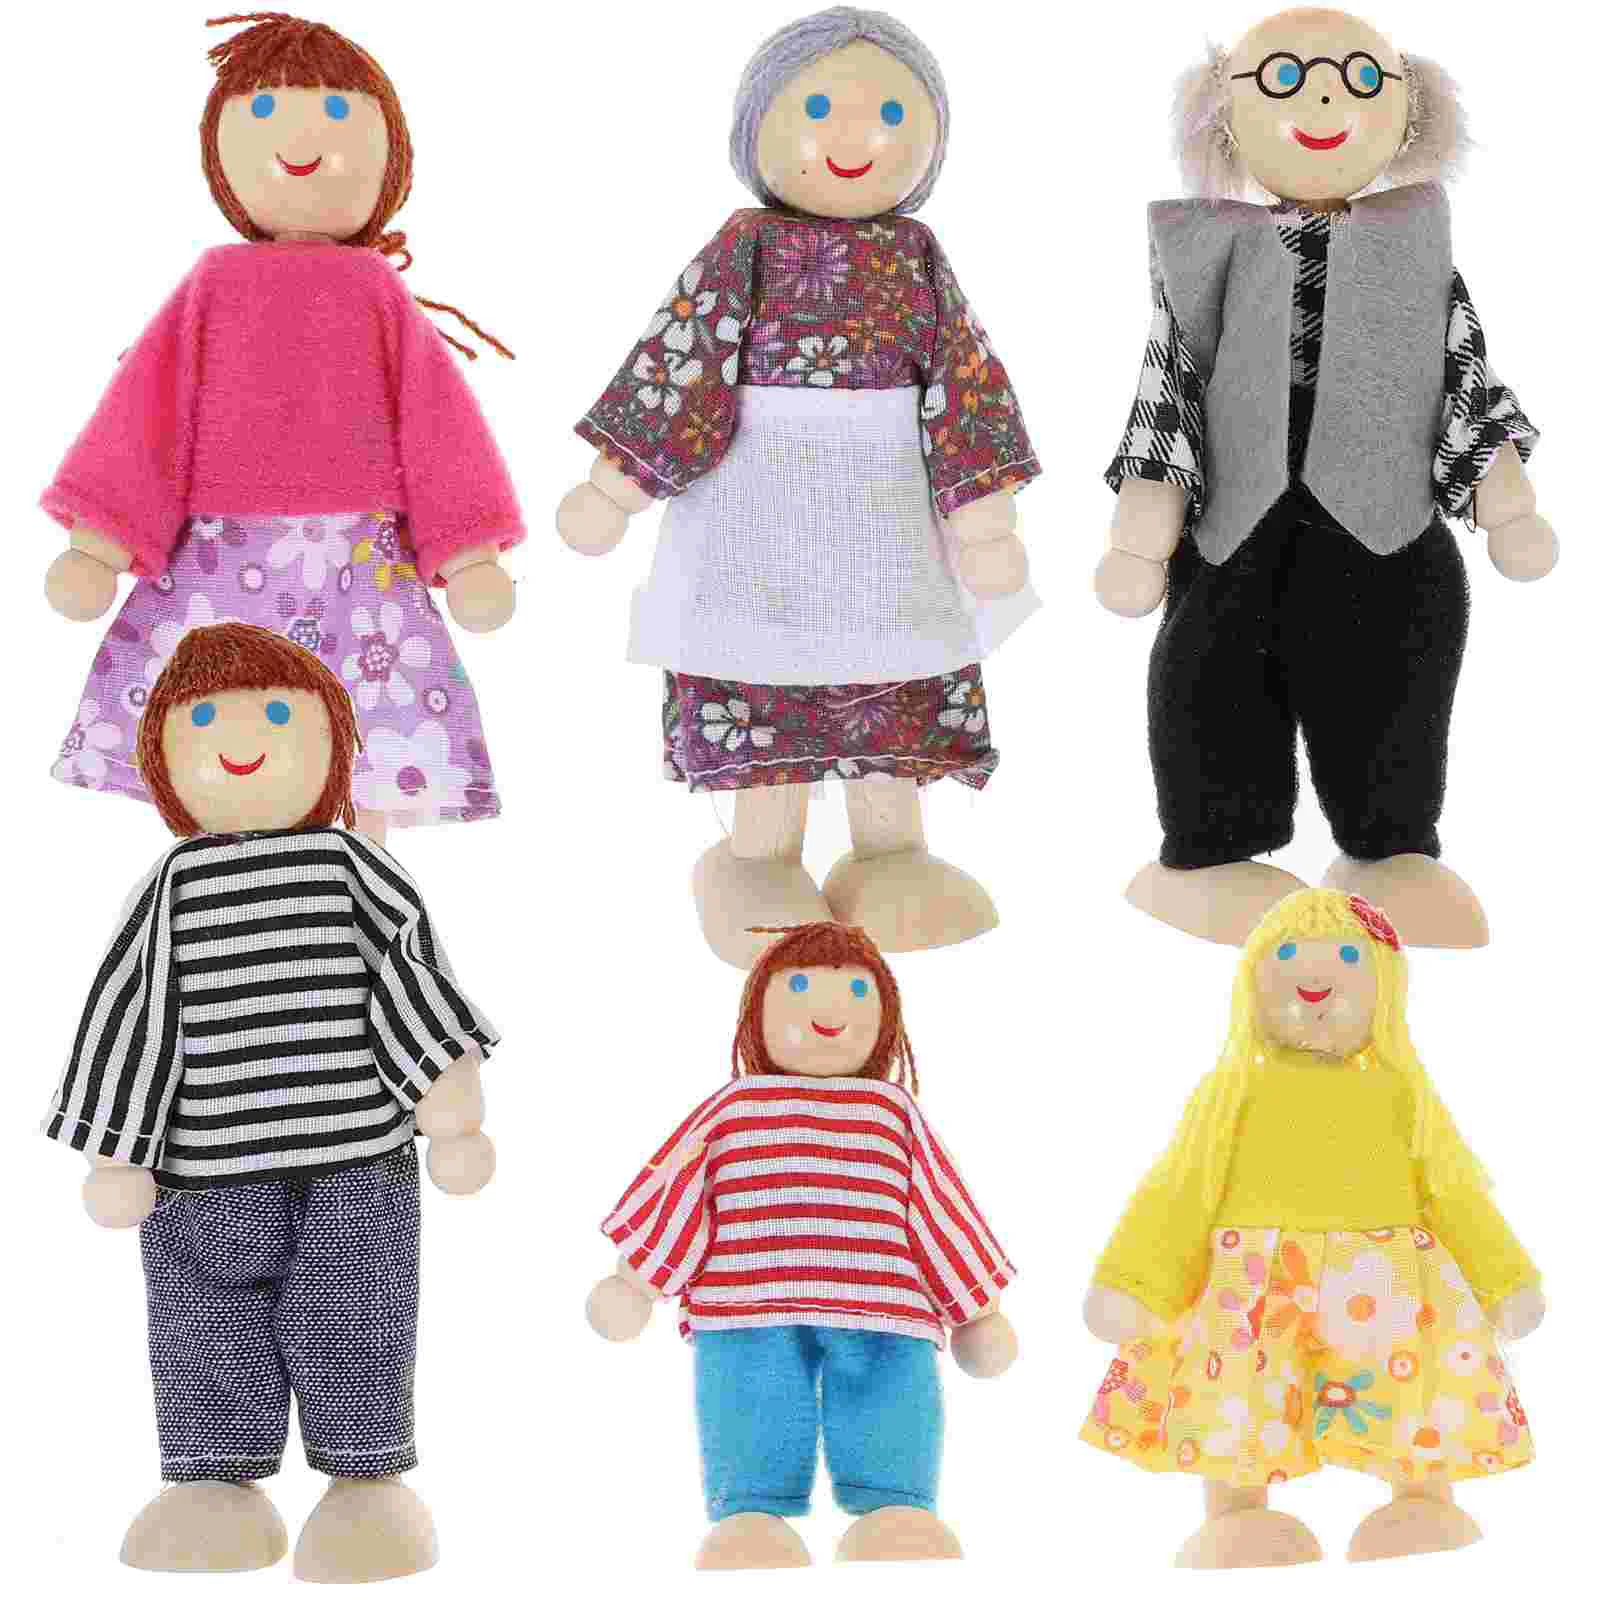 

Happy Family Dolls Playset: Wooden Figures Set of 6 People for Kids Children Pretend Gift 6pcs